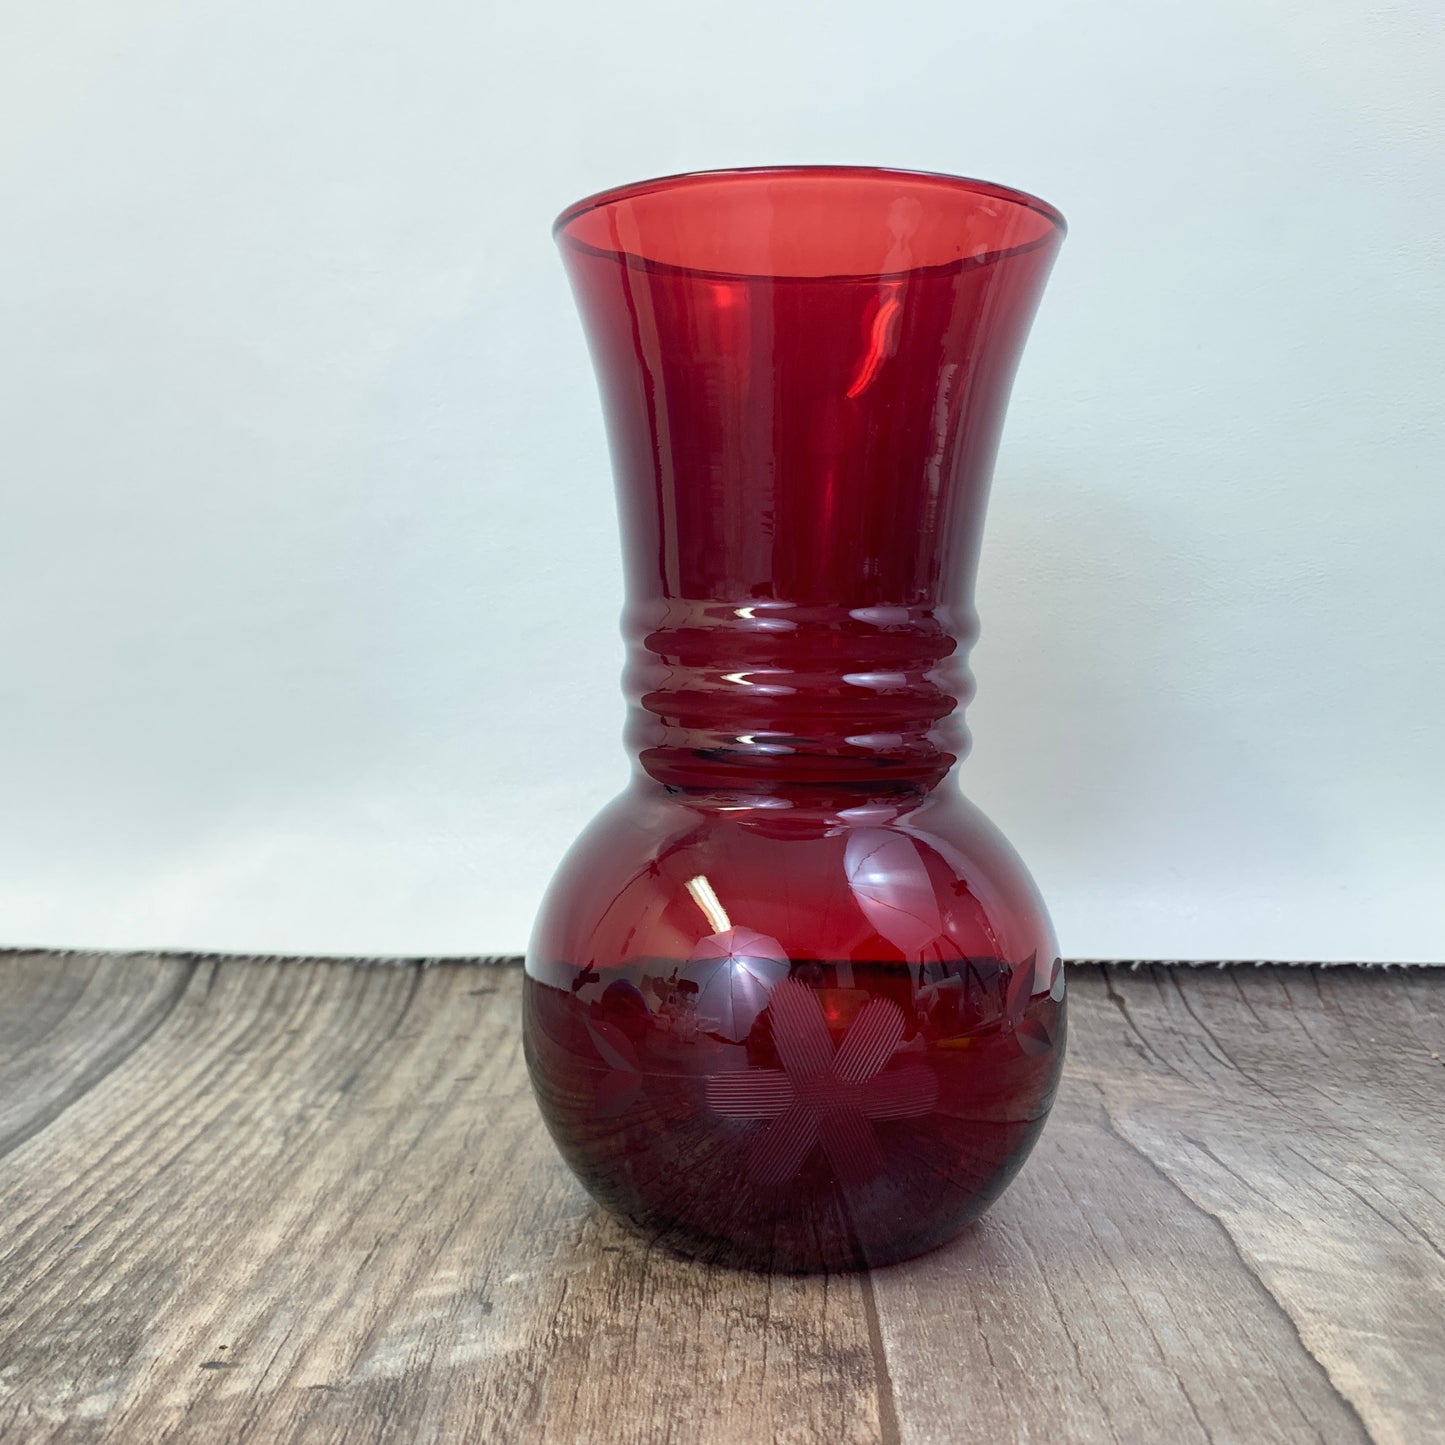 Ruby Red Pineapple Vase with Etched Design Ruby Red Glass Vase, Vintage Home Decor Small Red Vase, Vintage Housewarming Gifts